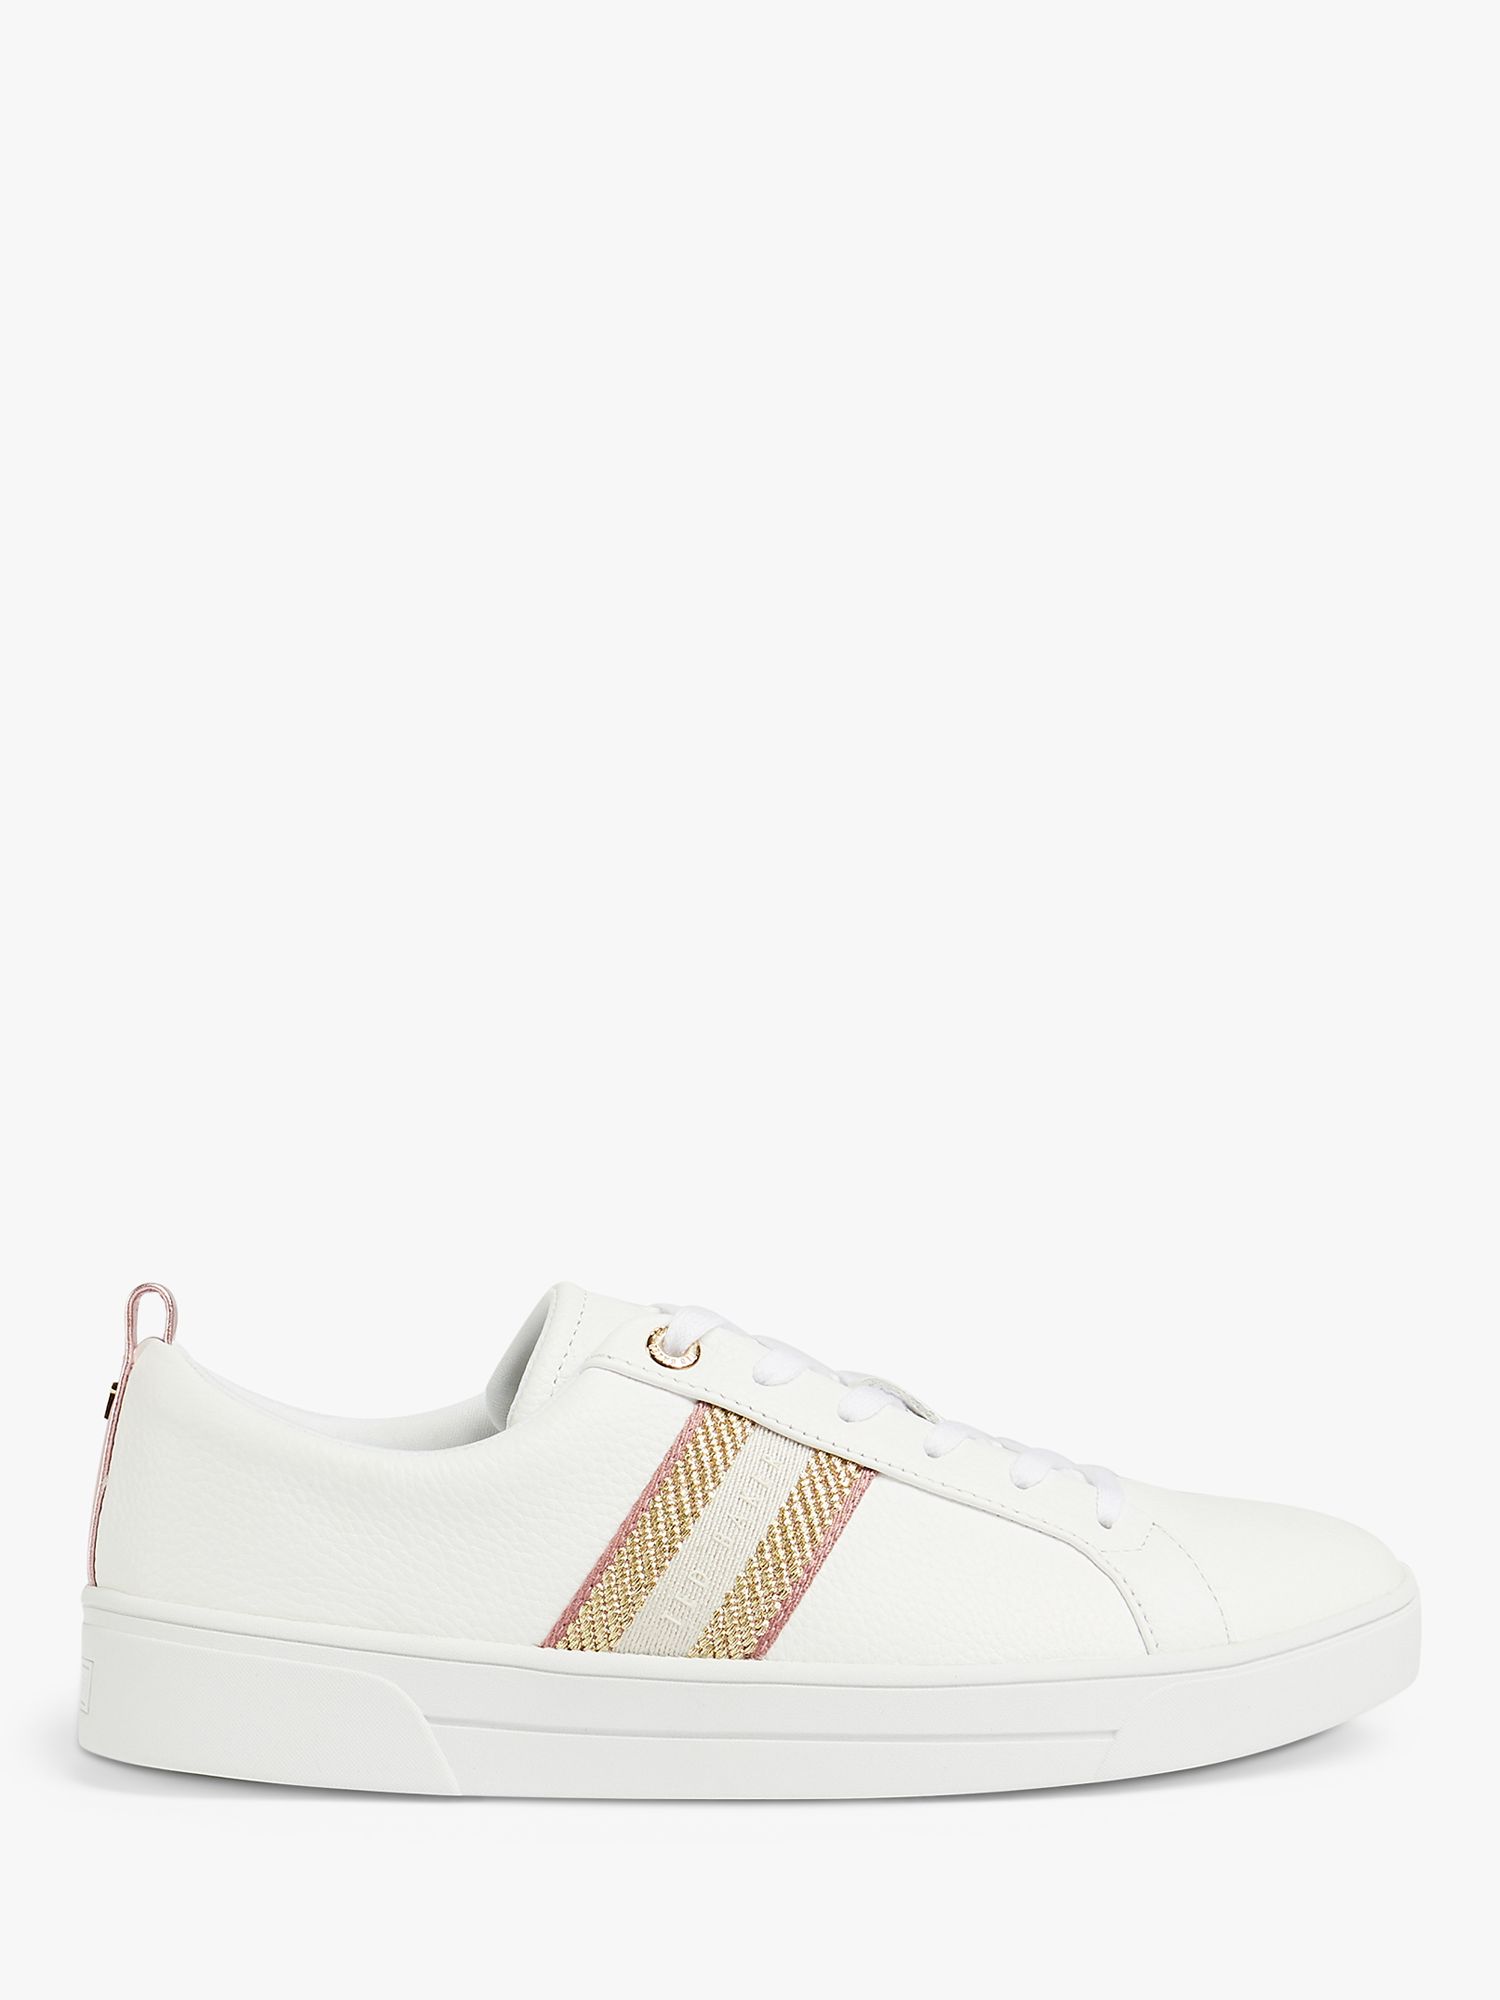 Кроссовки Ted Baker Baily, Белый/Металлик кроссовки ted baker baily white